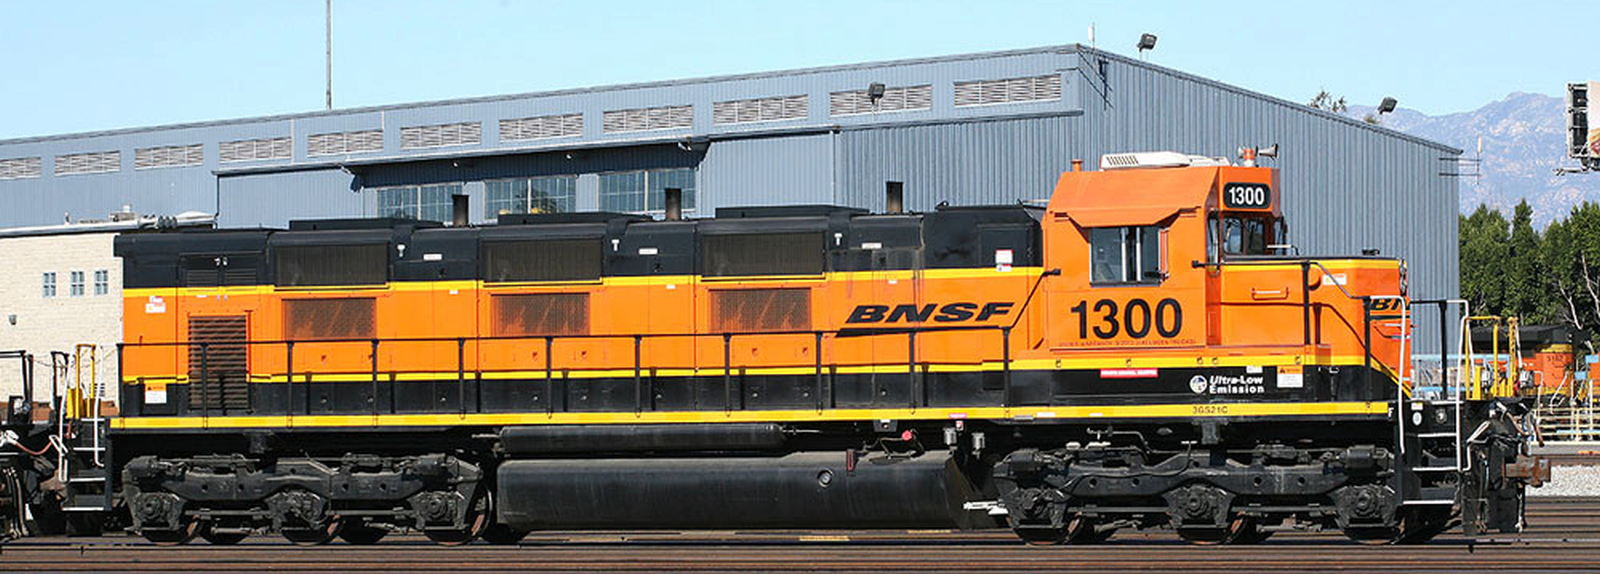 BNSF No. 1300 in January 2013 in Commerce, California